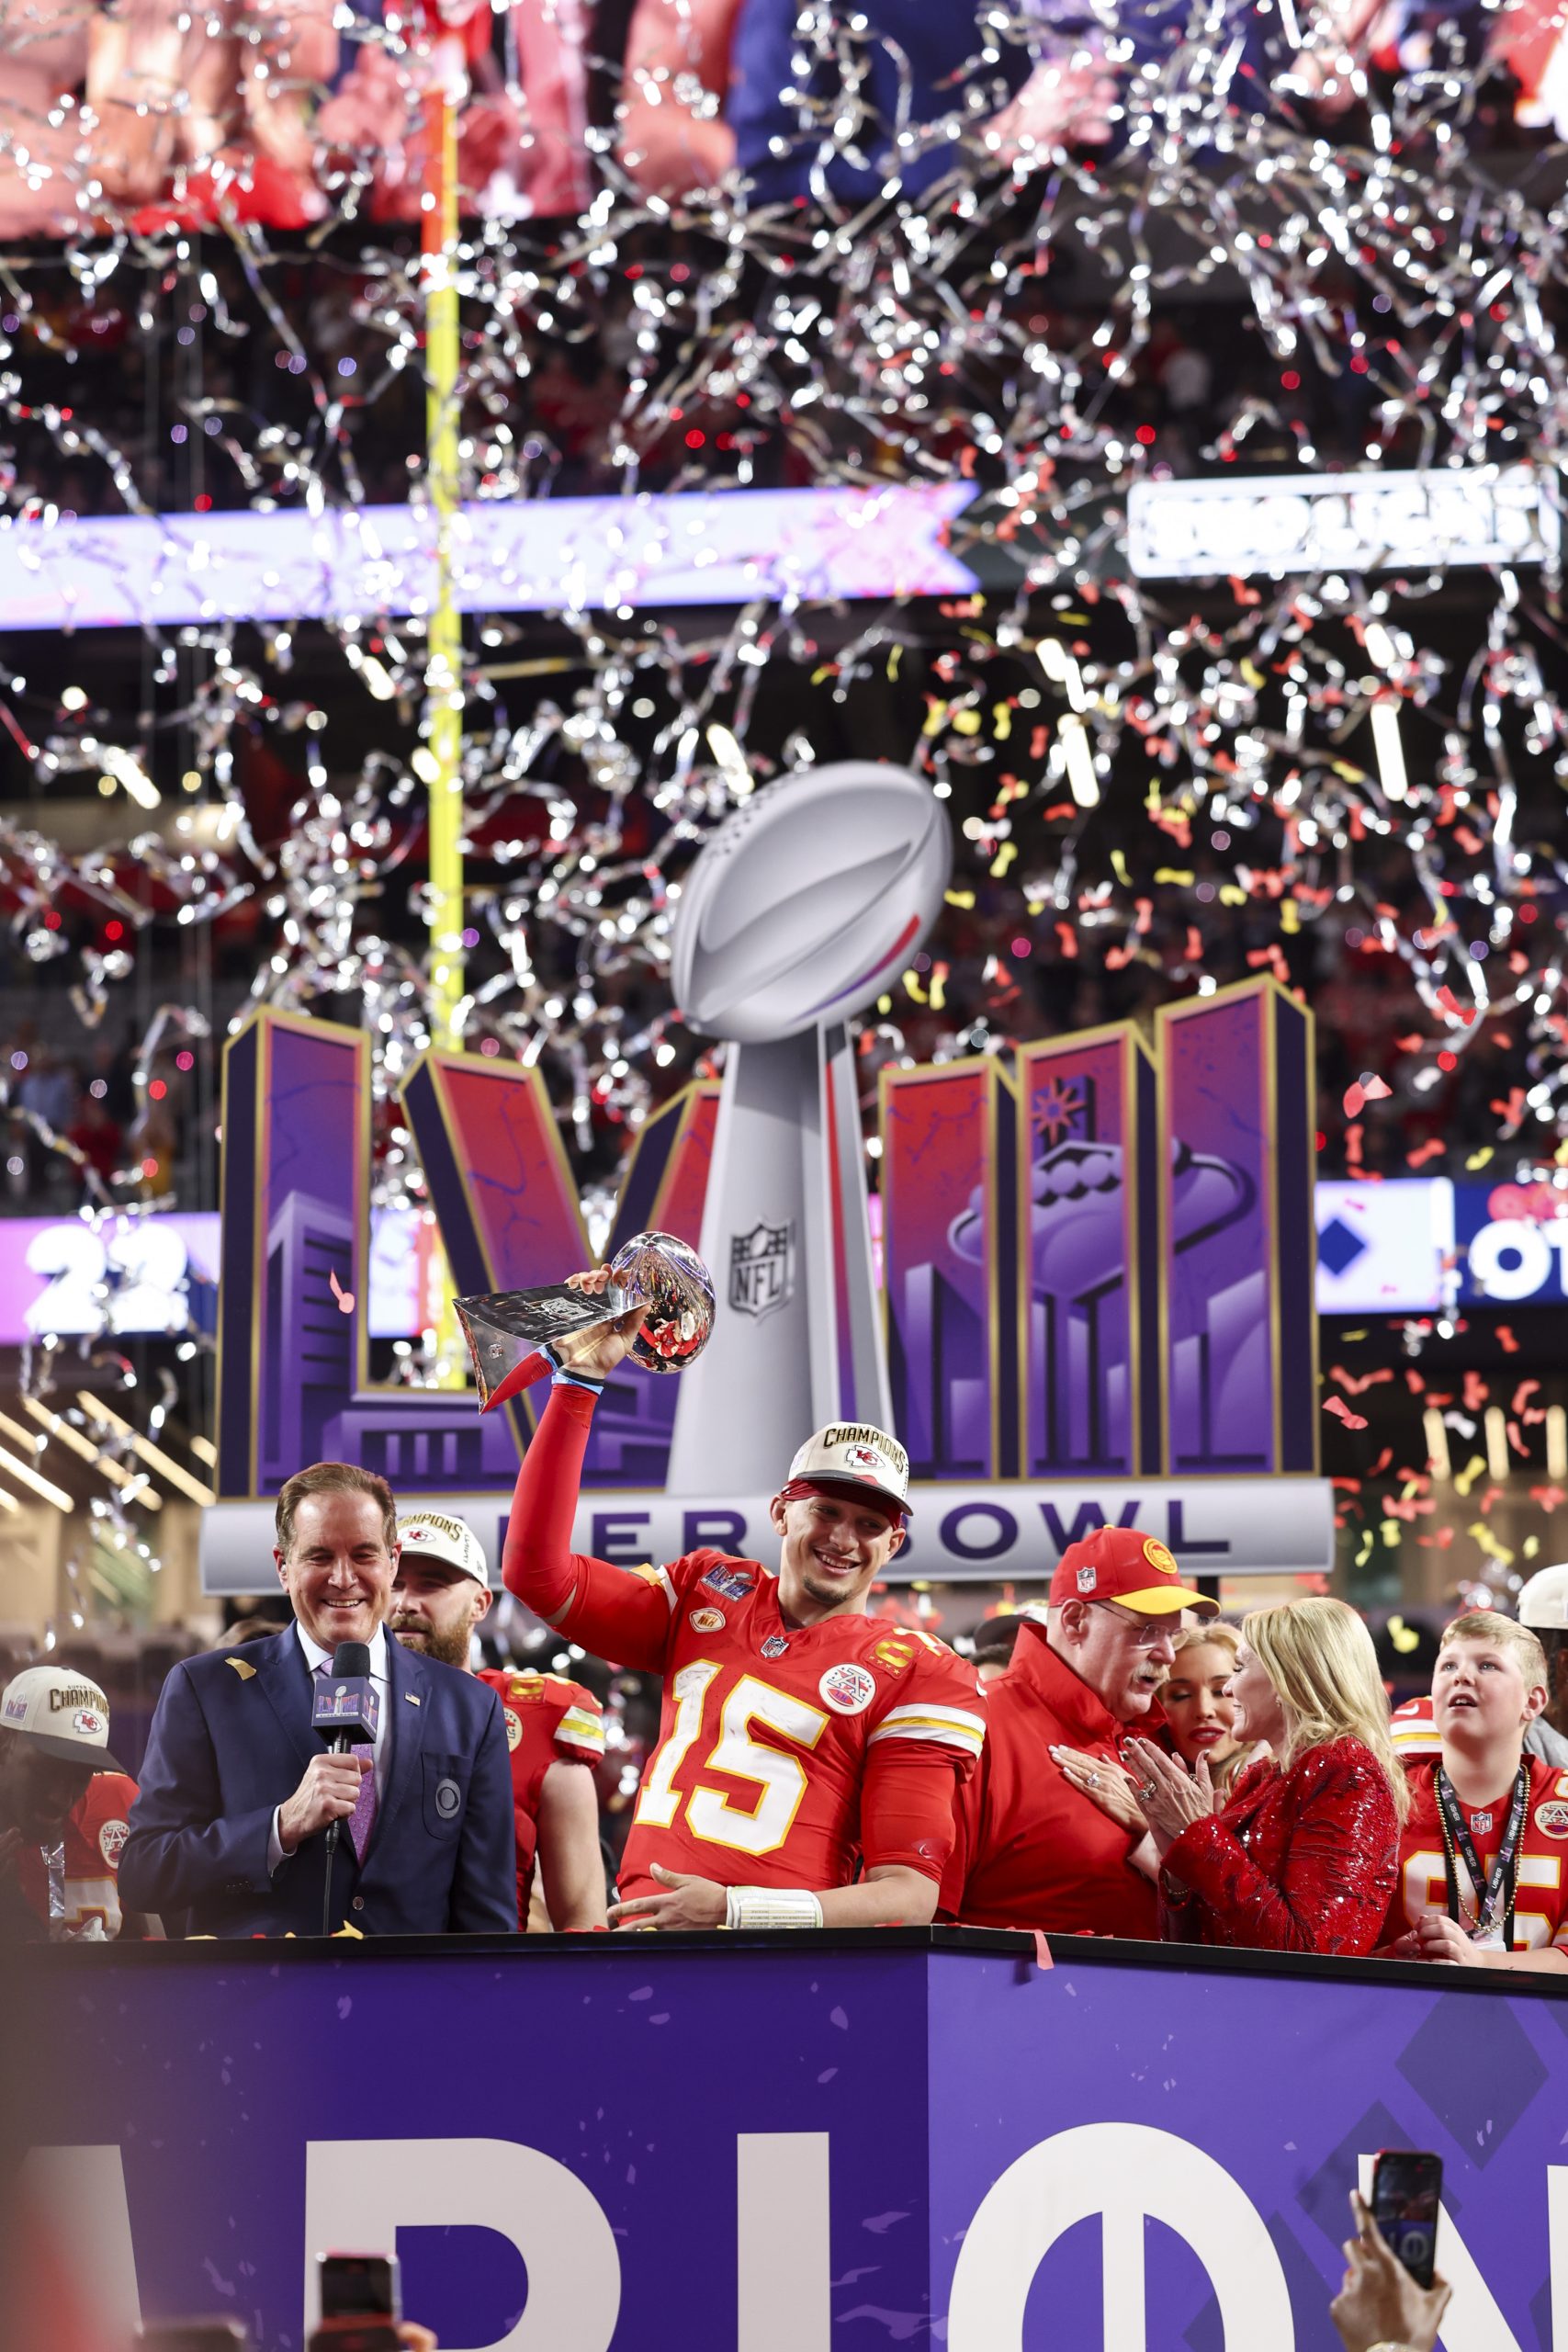 Mahomes has won three Super Bowls including the most recent one against the San Francisco 49ers in February